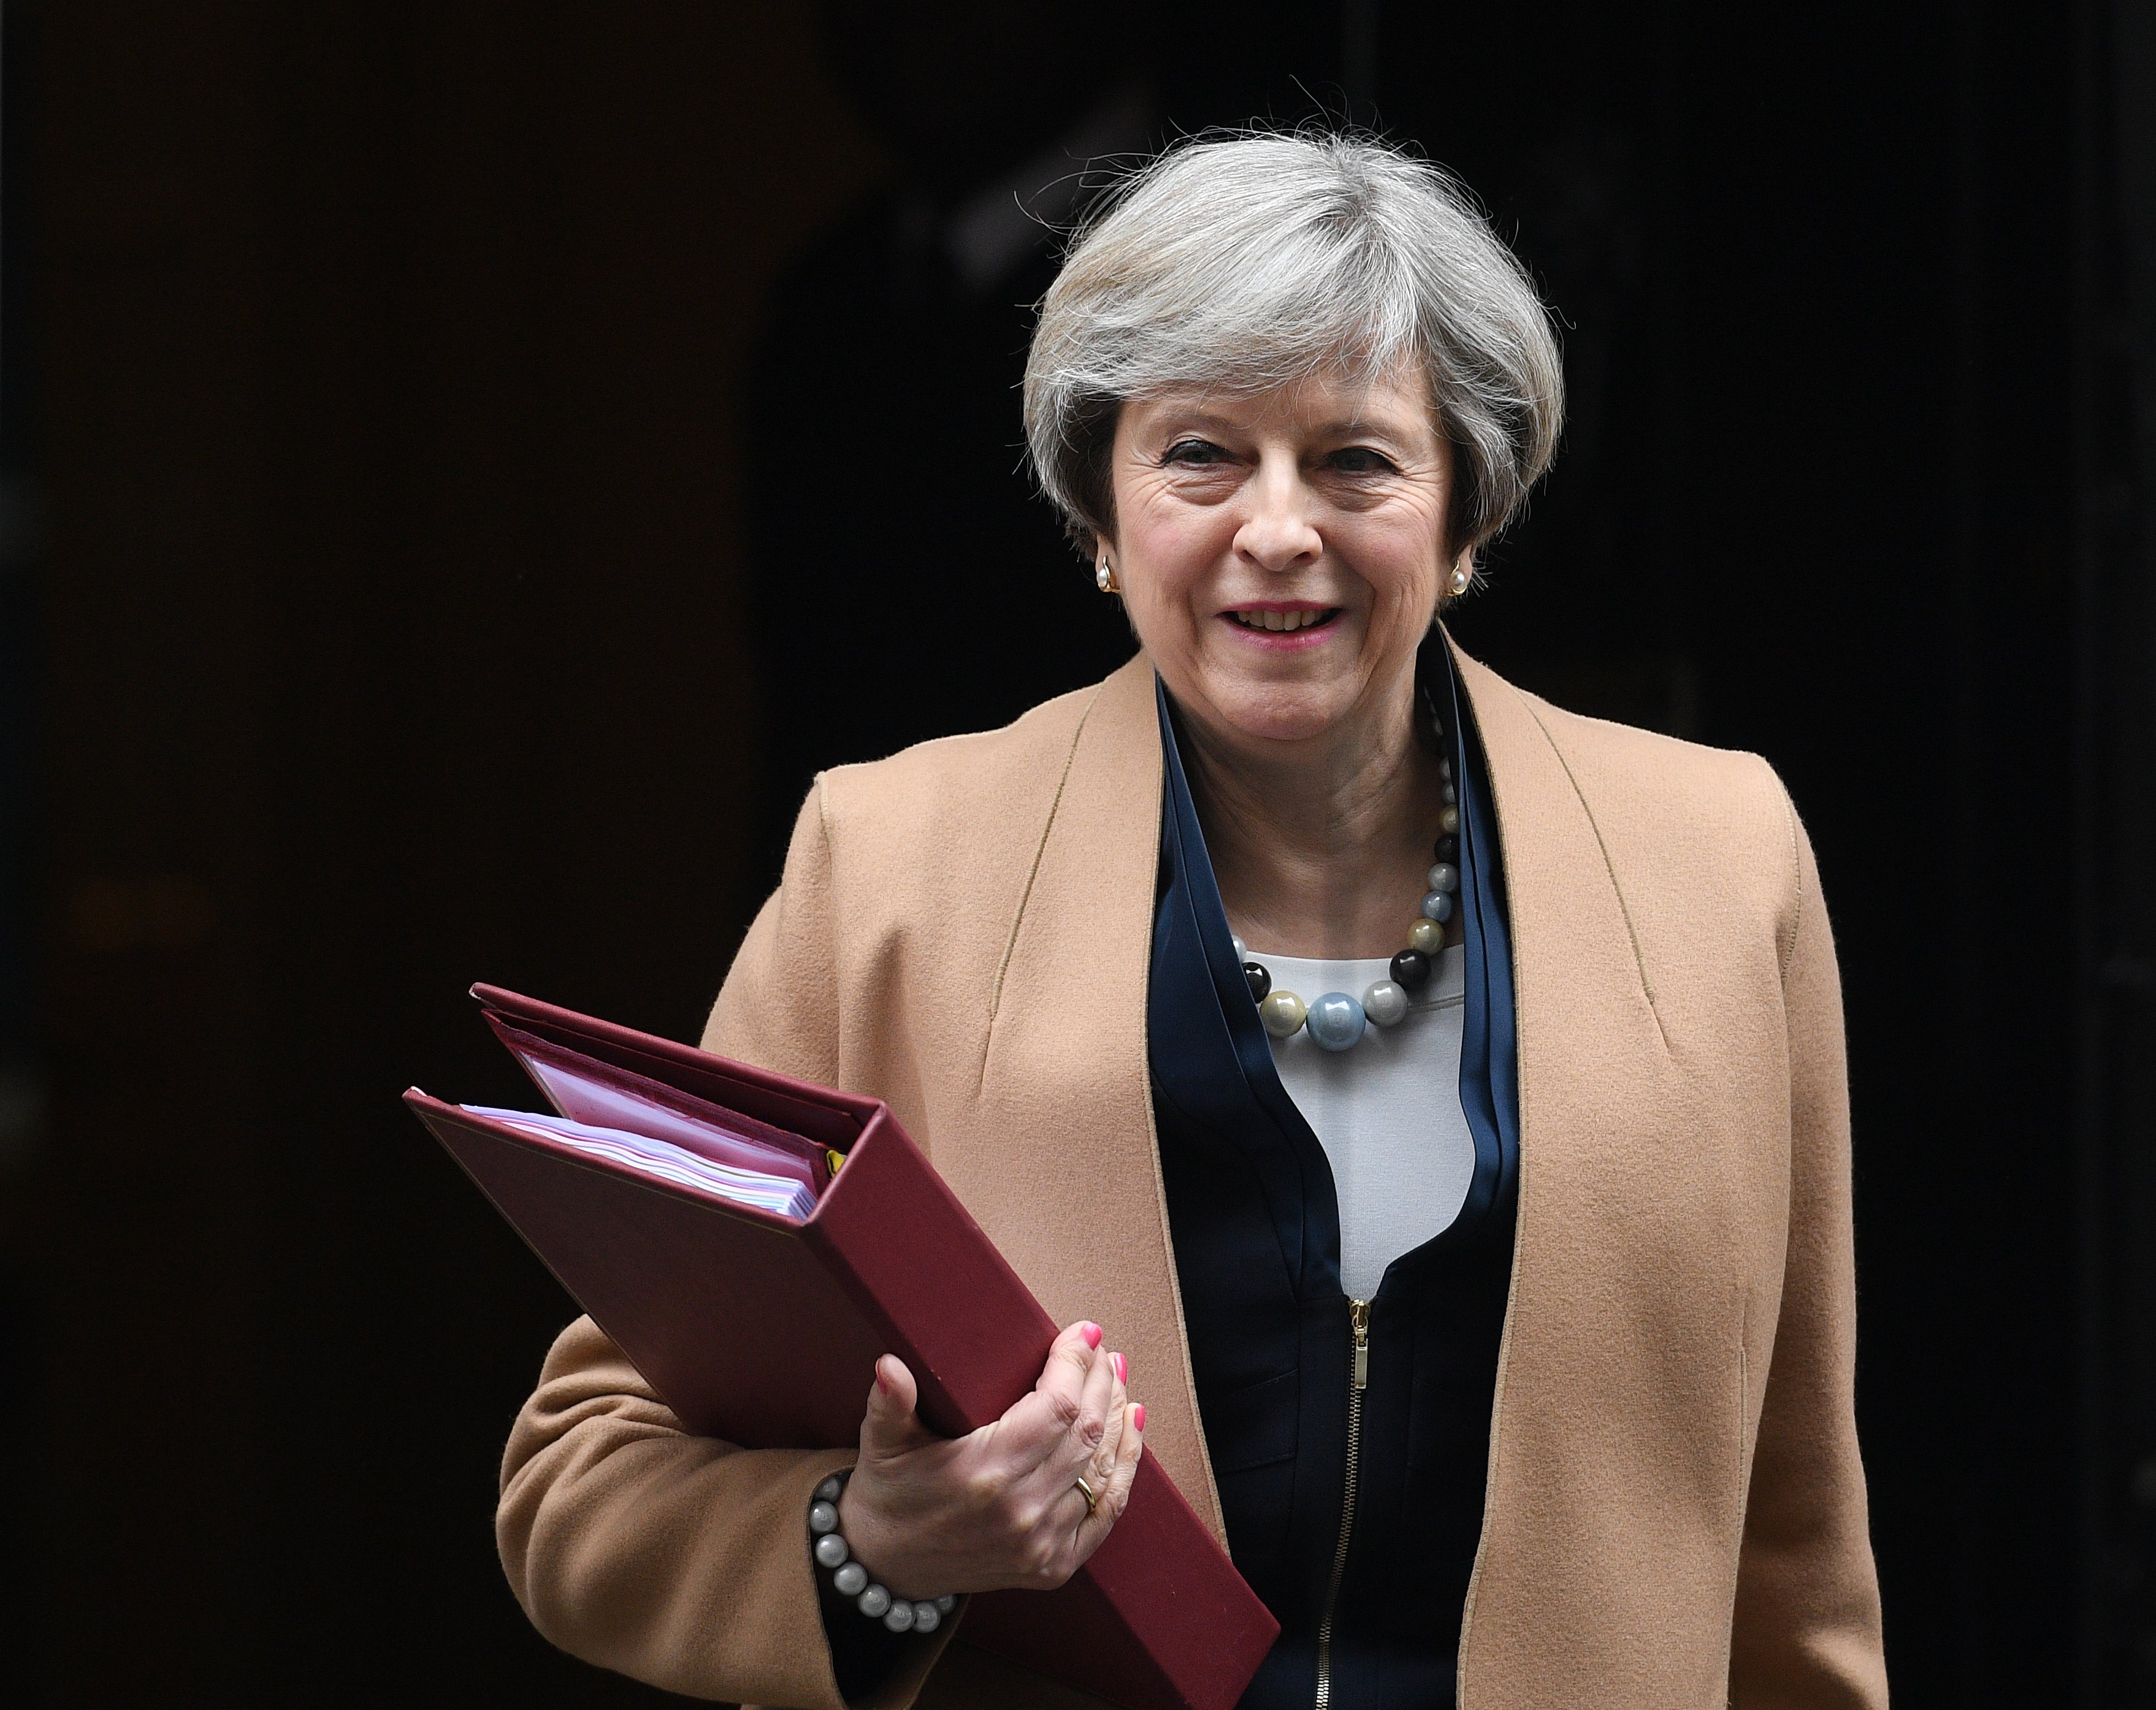 2017-03-08 11:50:20 epa05835987 British Prime Minister, Theresa May leaves 10 Downing Street, Whitehall, London 8 March 2017 for the House of Common. After Prime Minister's Questions, the Chancellor of the Exchequer will deliver his Spring Budget. EPA/FACUNDO ARRIZABALAGA